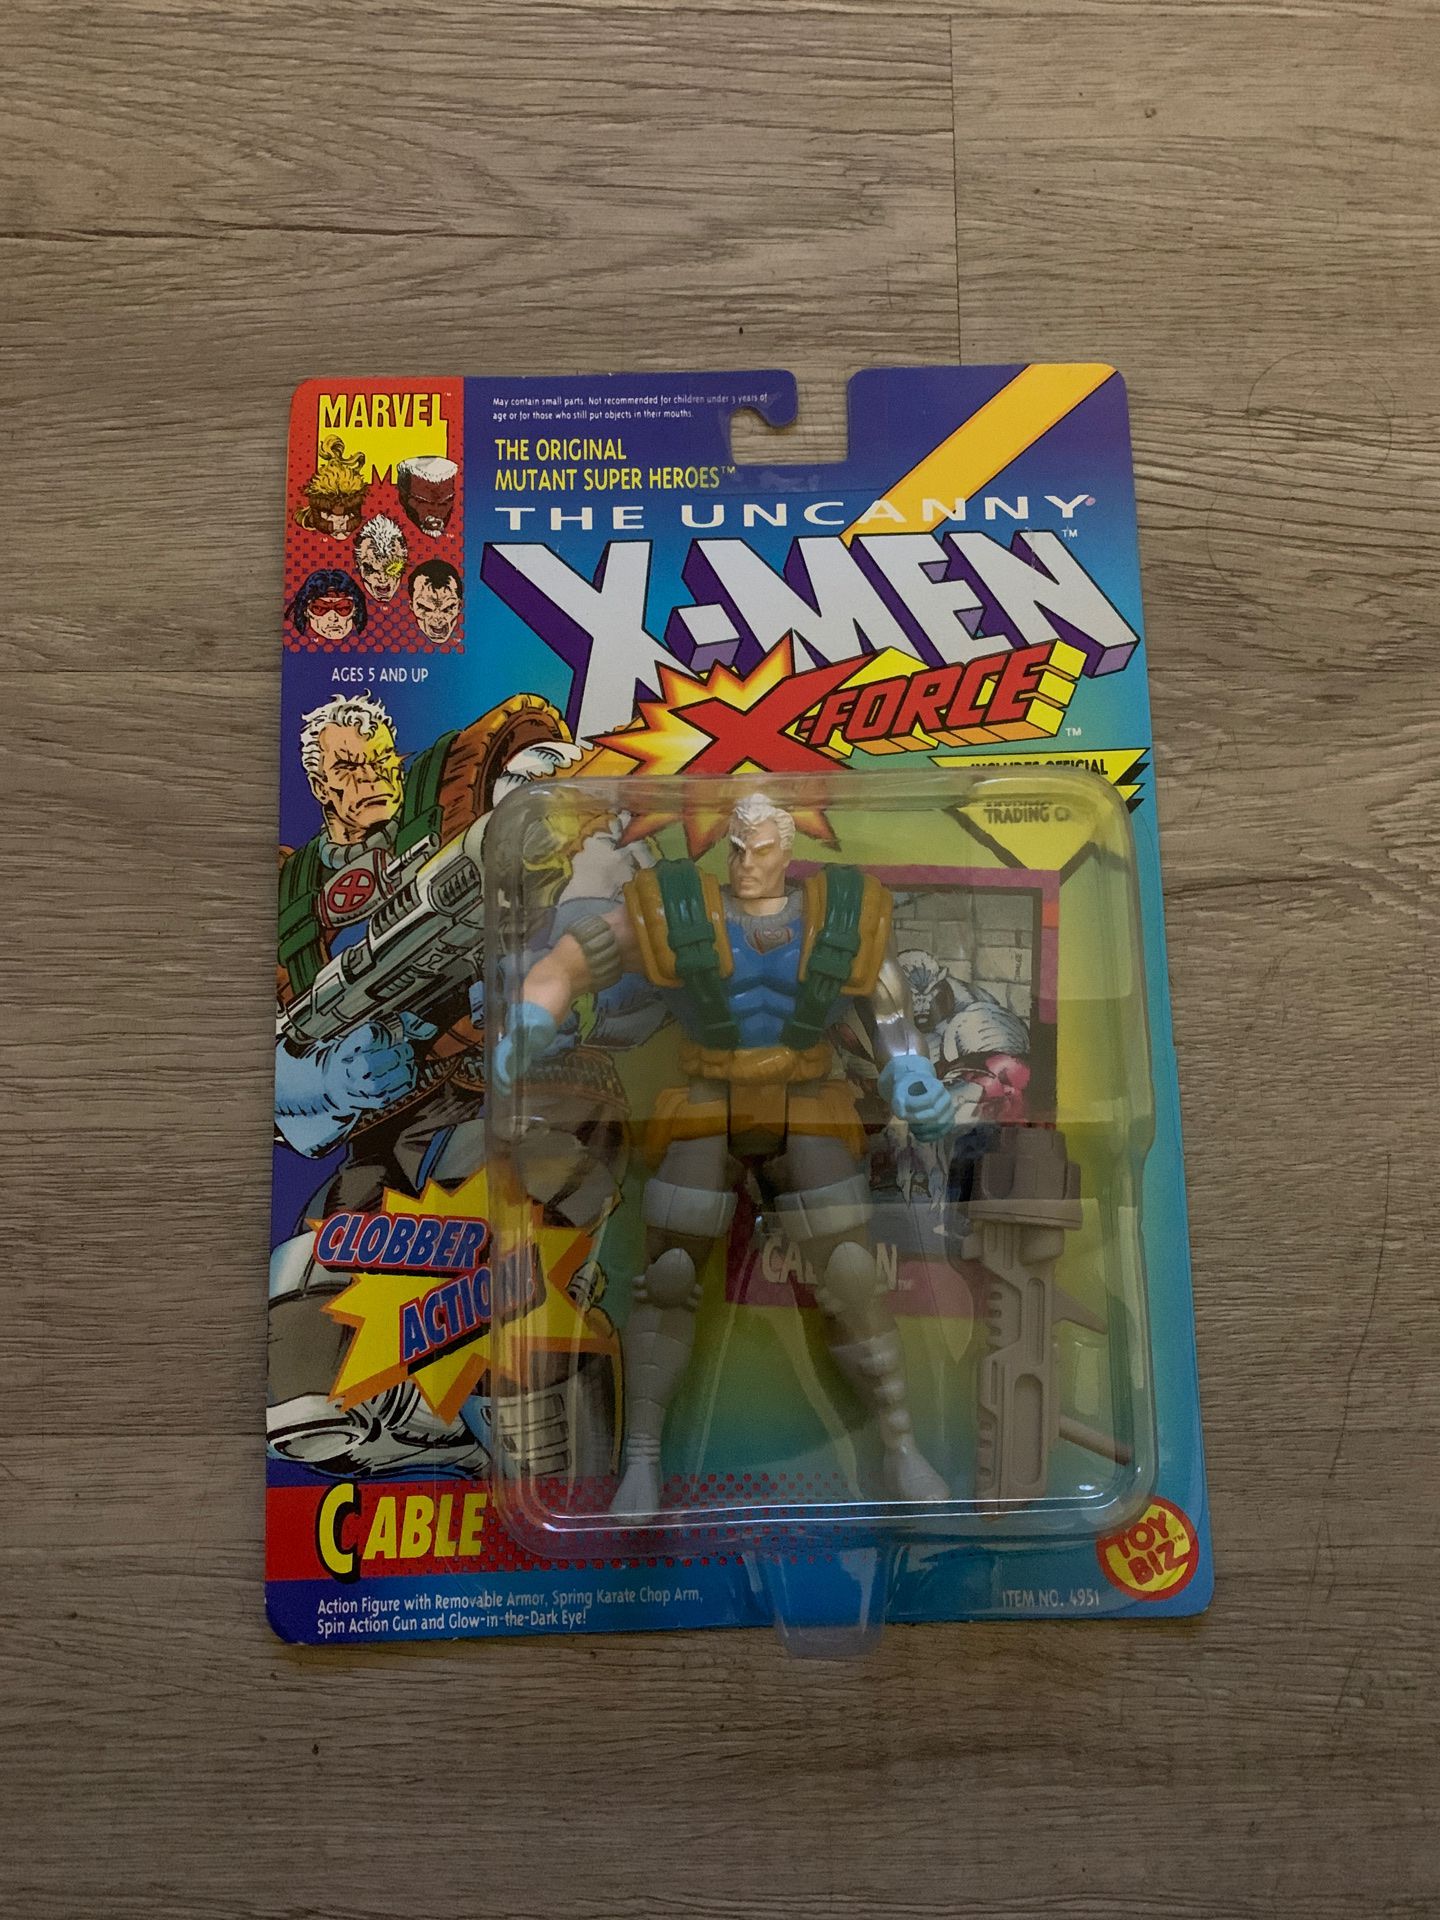 Marvel X-Men “Cable” 1992 Collectible Action Figure